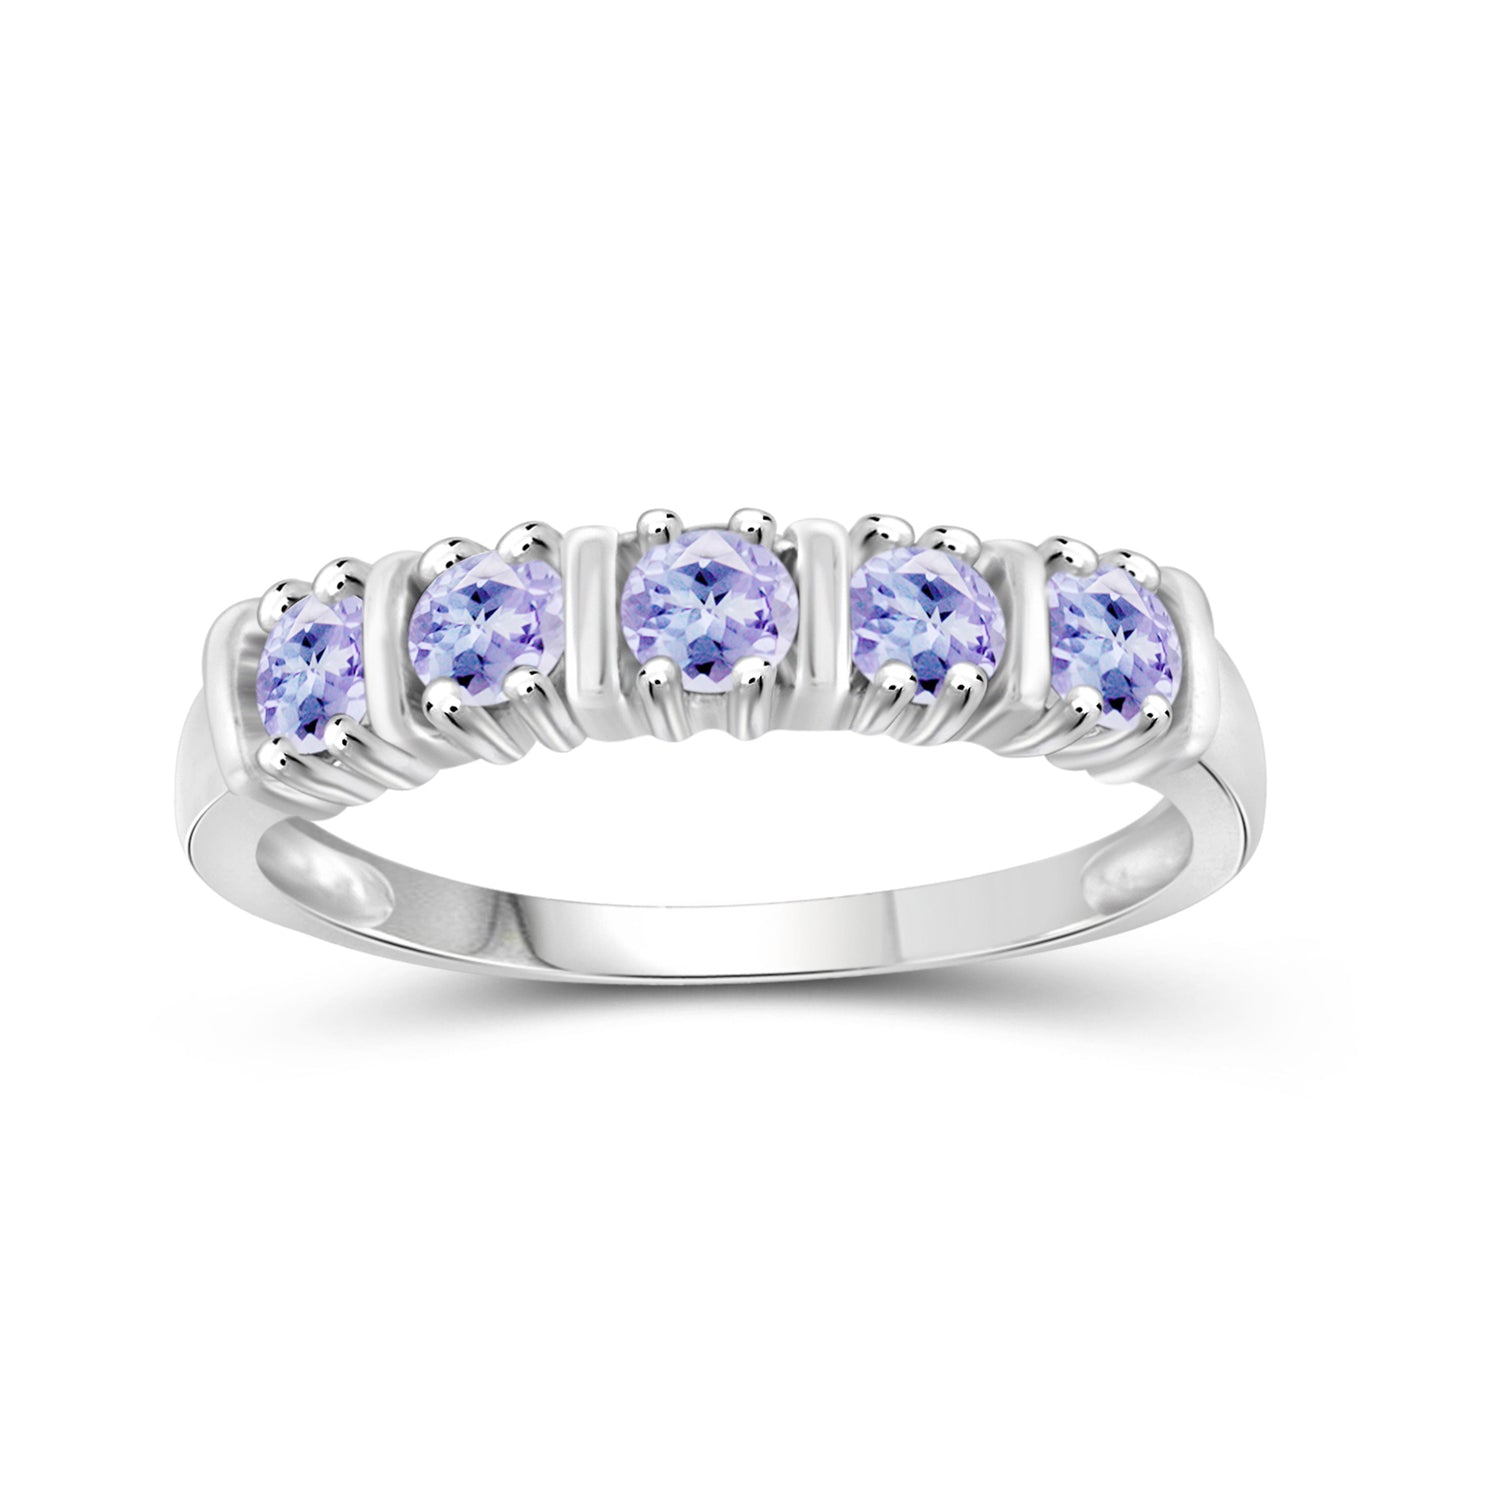 0.50 CTW Tanzanite Gemstone Ring in Sterling Silver Or 14K Gold-Plated